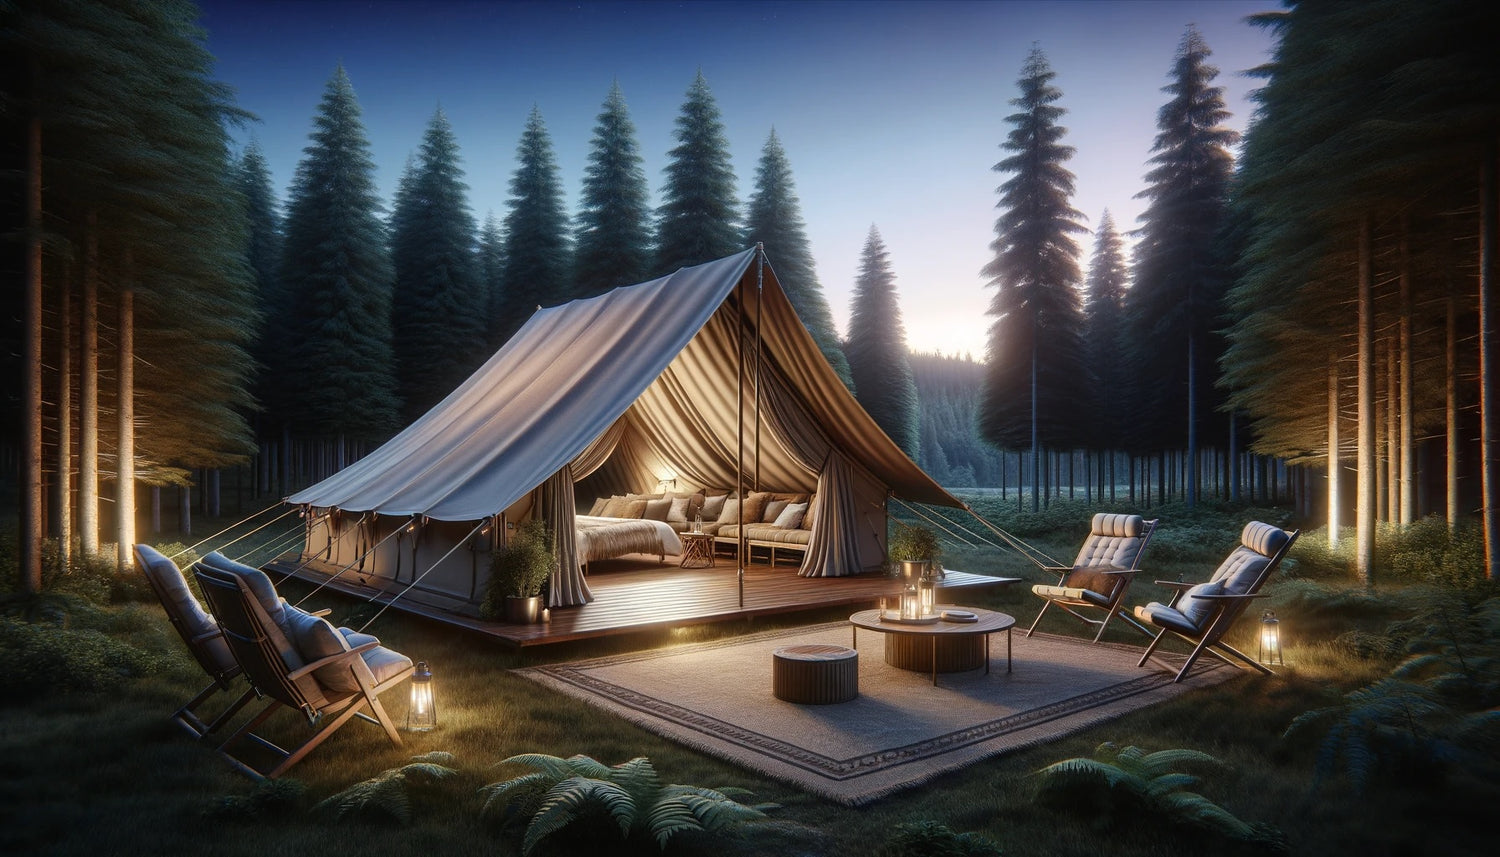 Luxurious glamping tent in a serene forest at sunset, embodying upscale outdoor living.